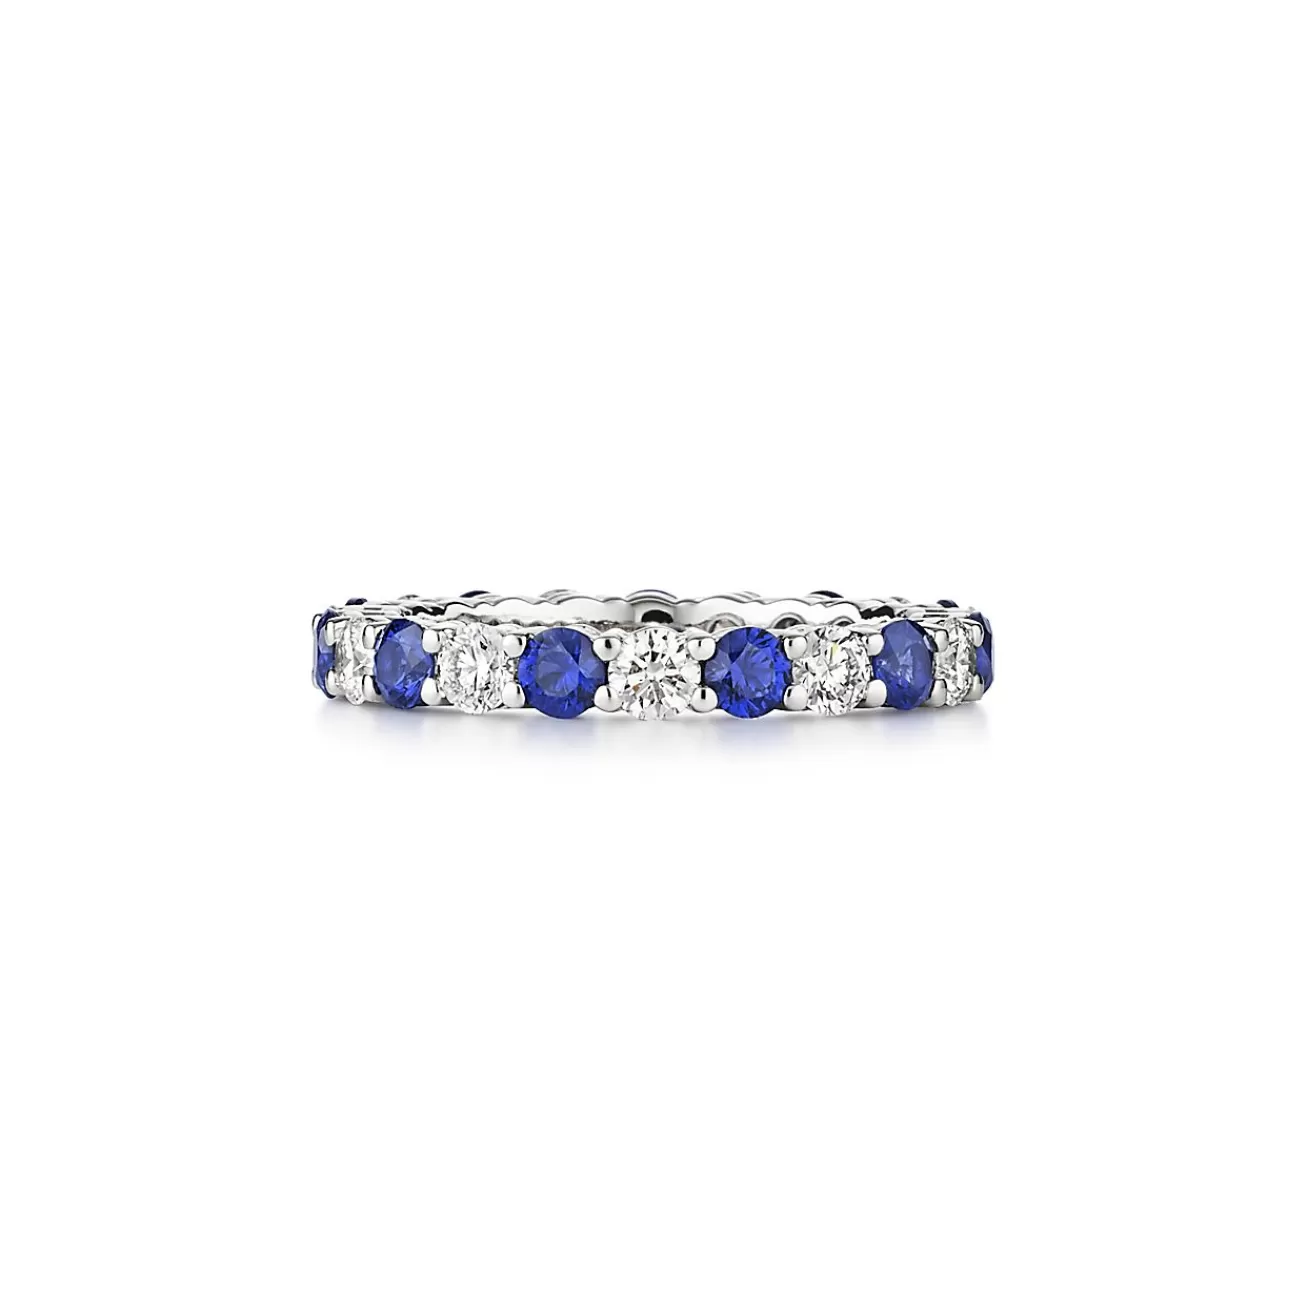 Tiffany & Co. Tiffany Forever Band Ring in Platinum with a Full Circle of Sapphires & Diamonds | ^Women Rings | Platinum Jewelry